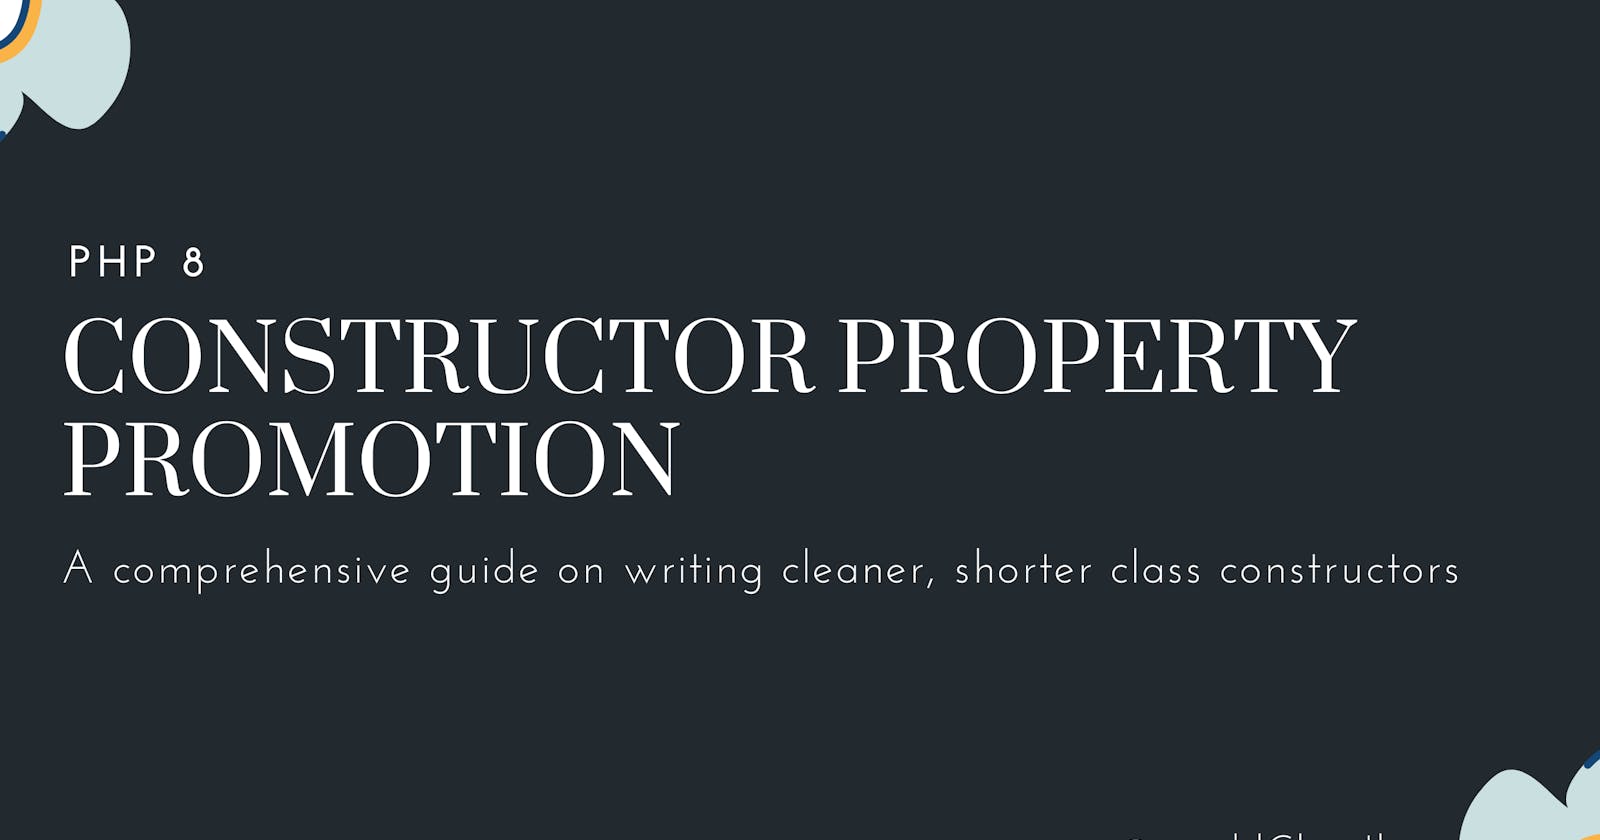 PHP 8: Constructor Property Promotion